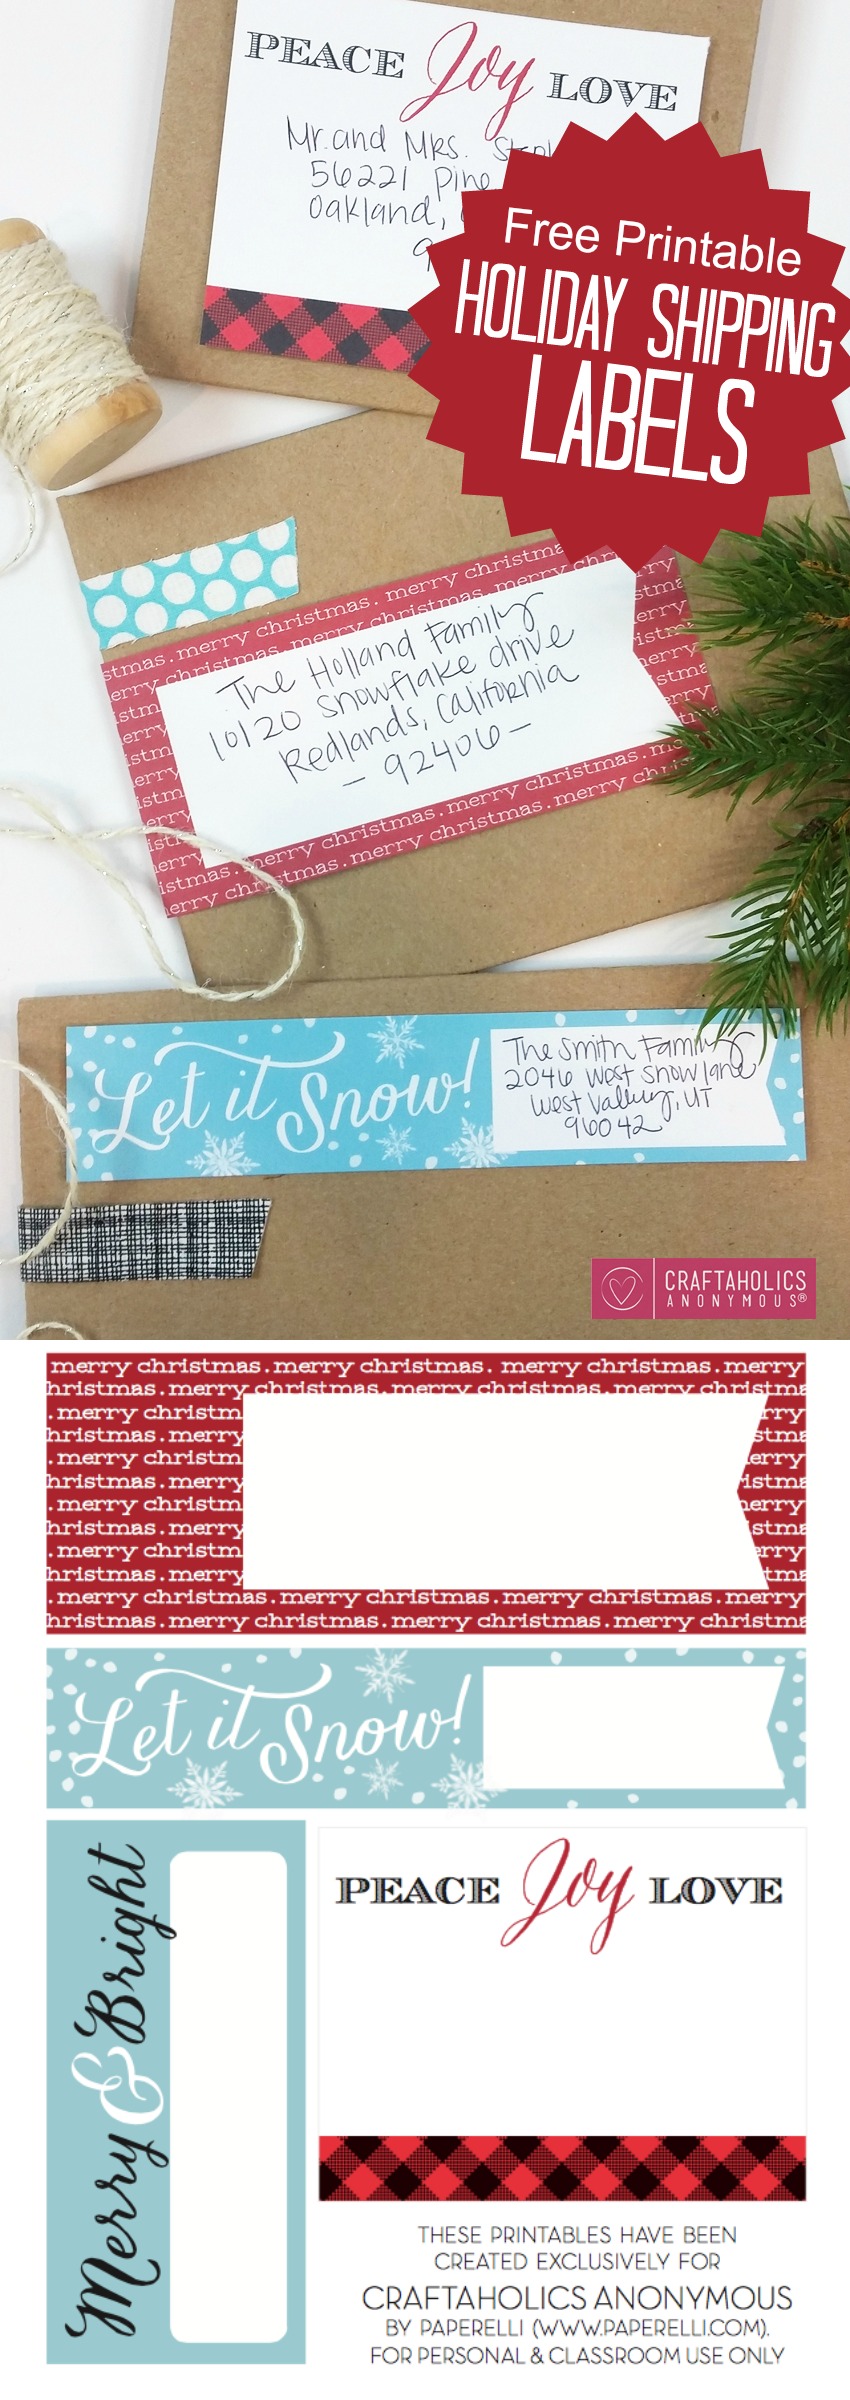 Craftaholics Anonymous Christmas Mailing Labels